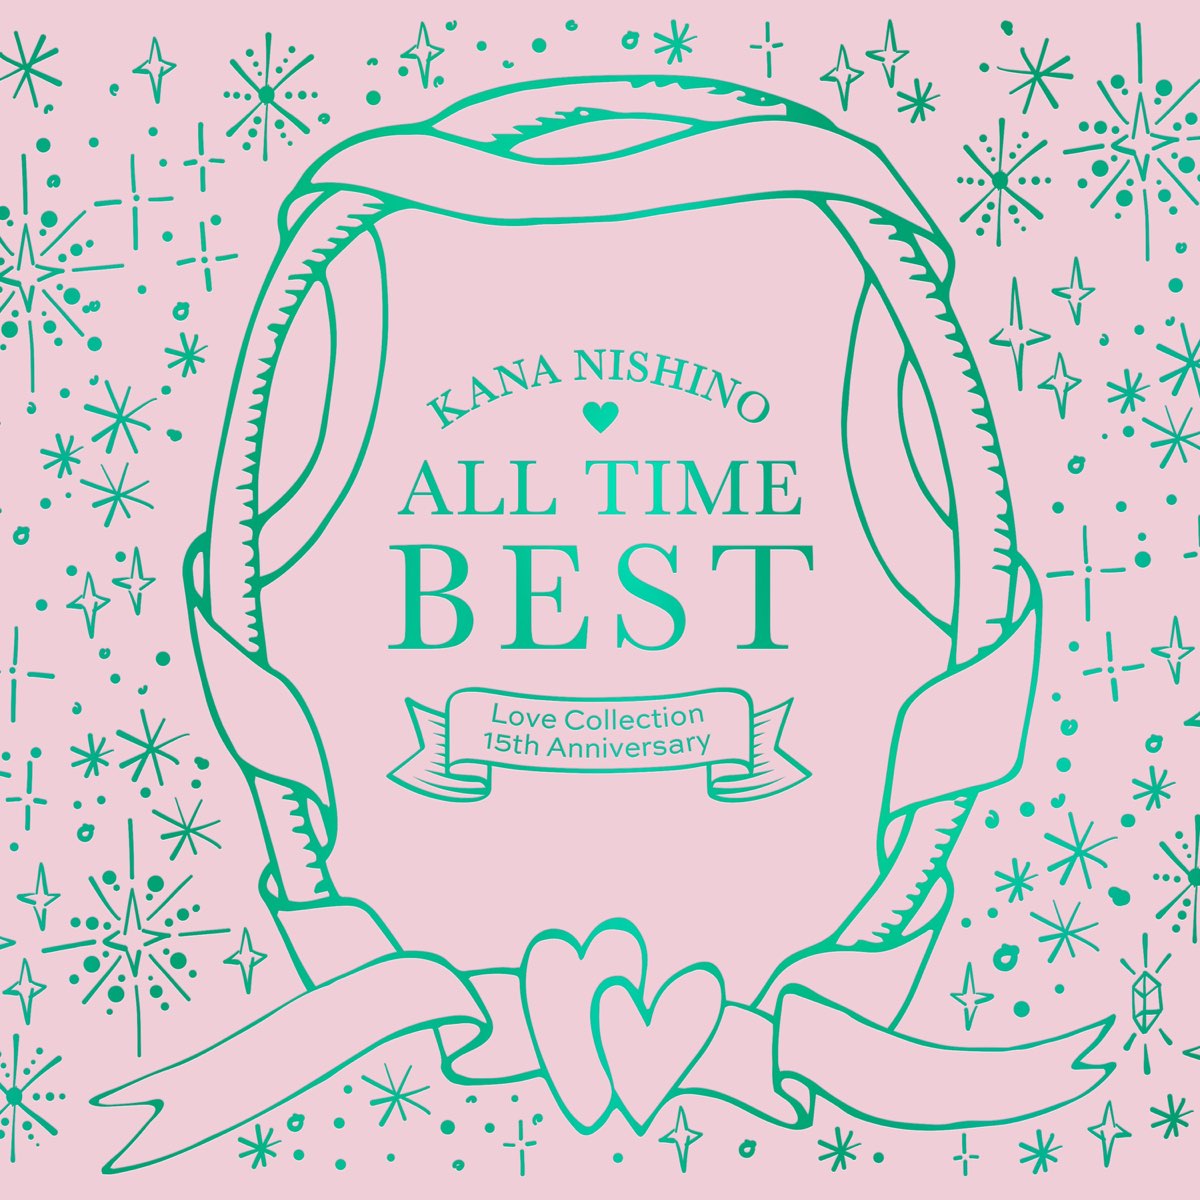 ALL TIME BEST ~Love Collection 15th Anniversary~ - Album by 